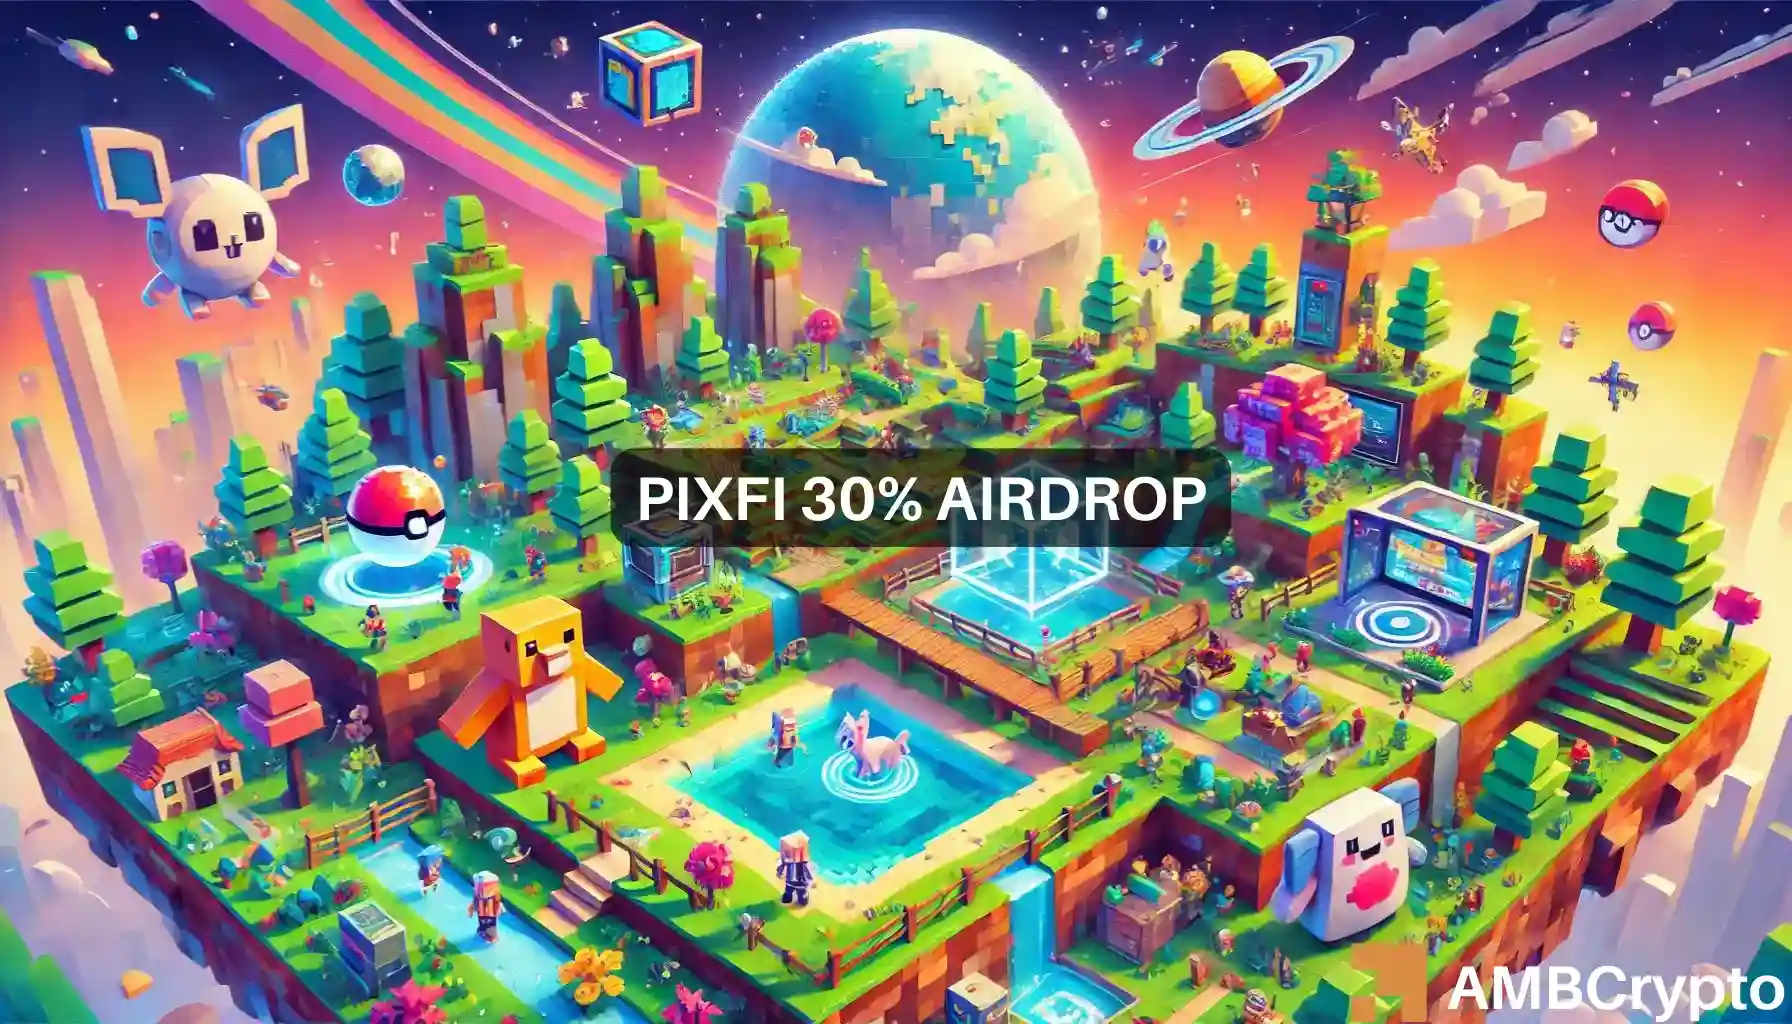 Pixelverse [PIXFI] skyrockets 360% in 24 hours: Assessing the reasons why